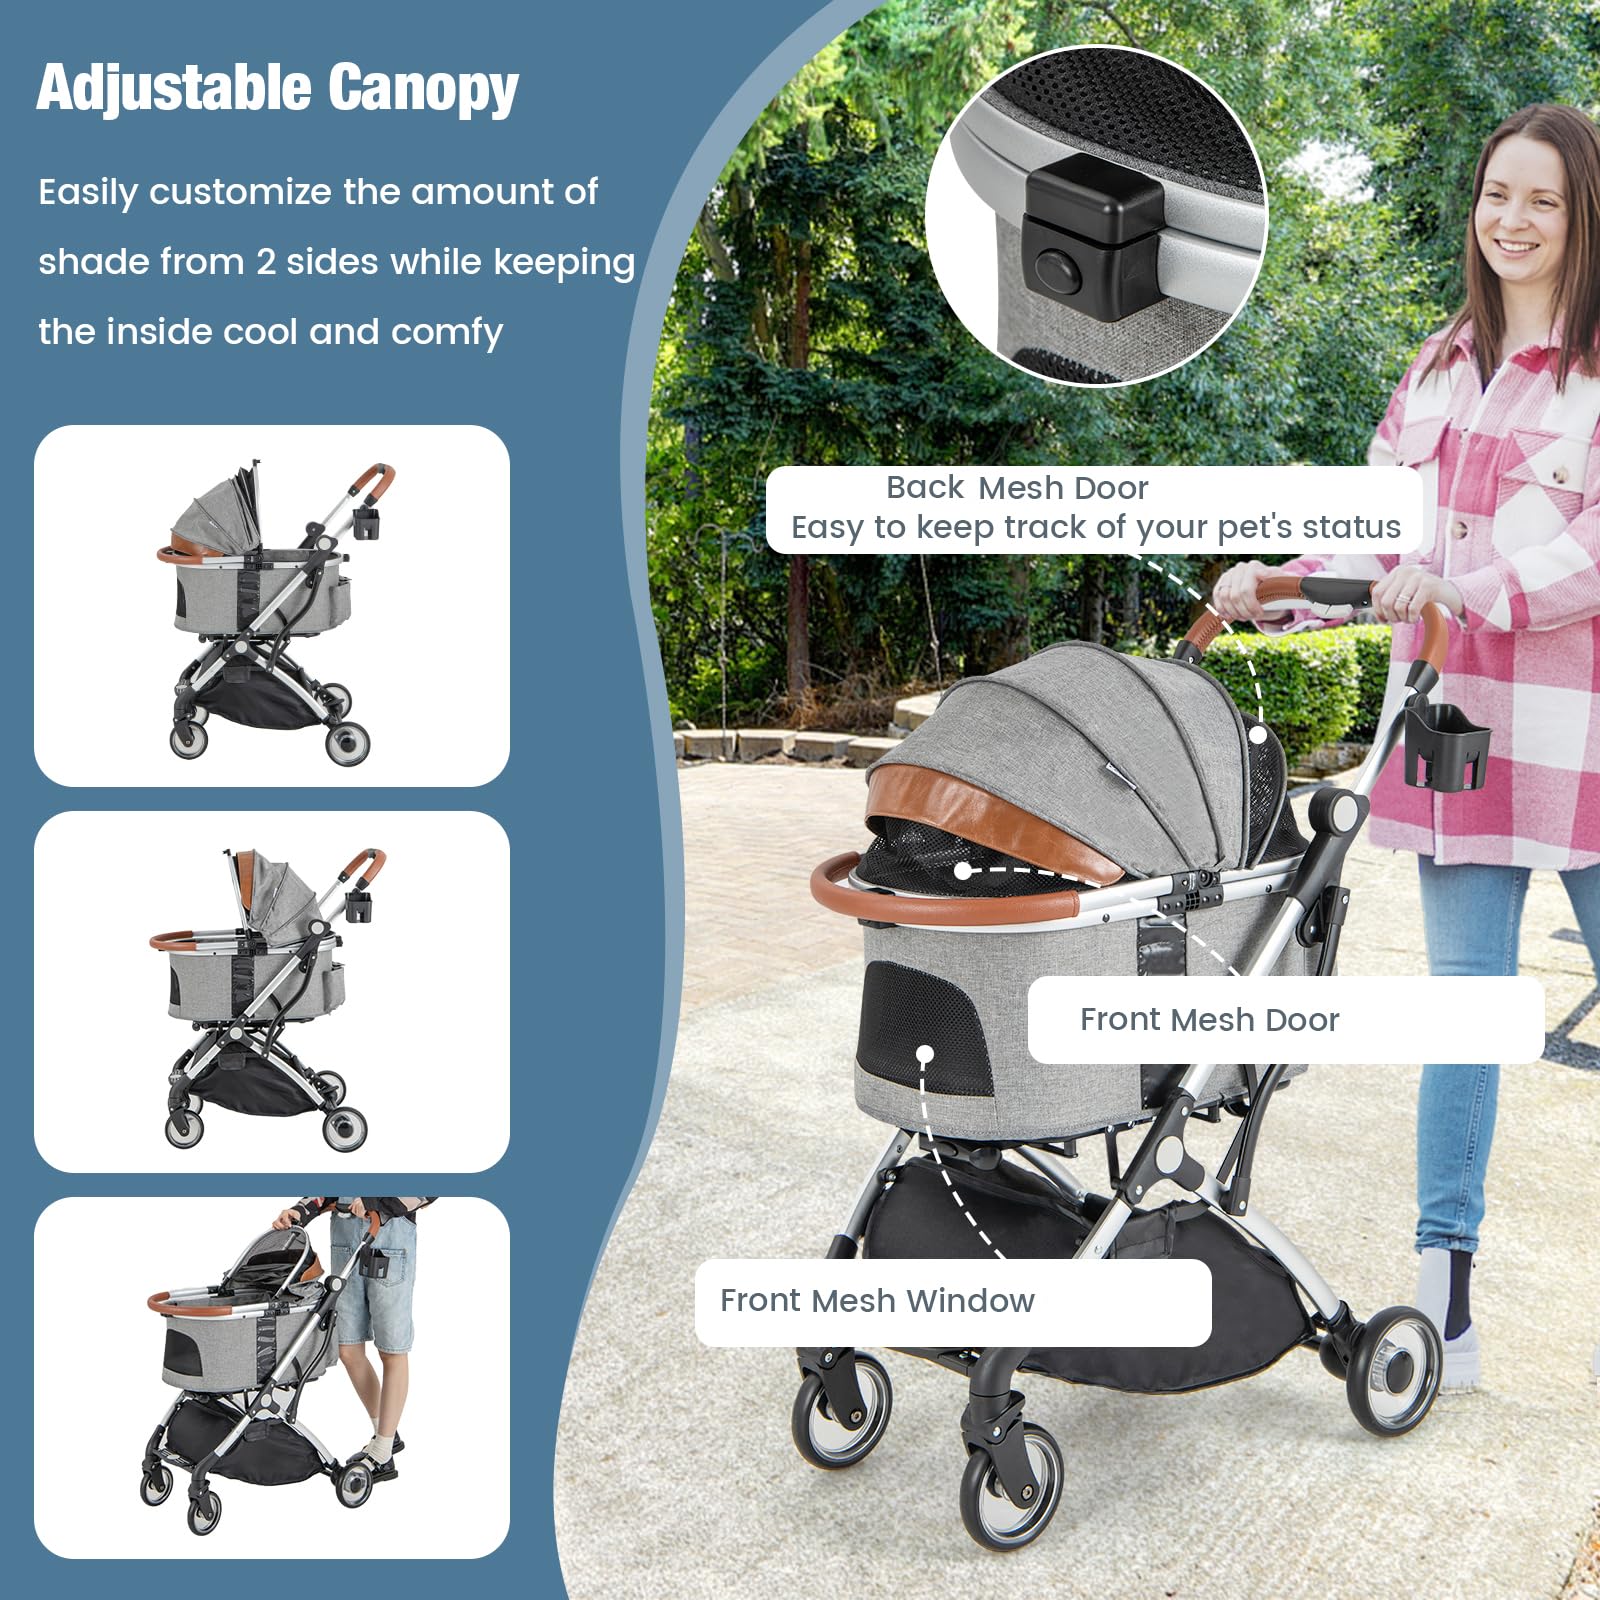 Giantex Dog Stroller with Detachable Cat Carrier